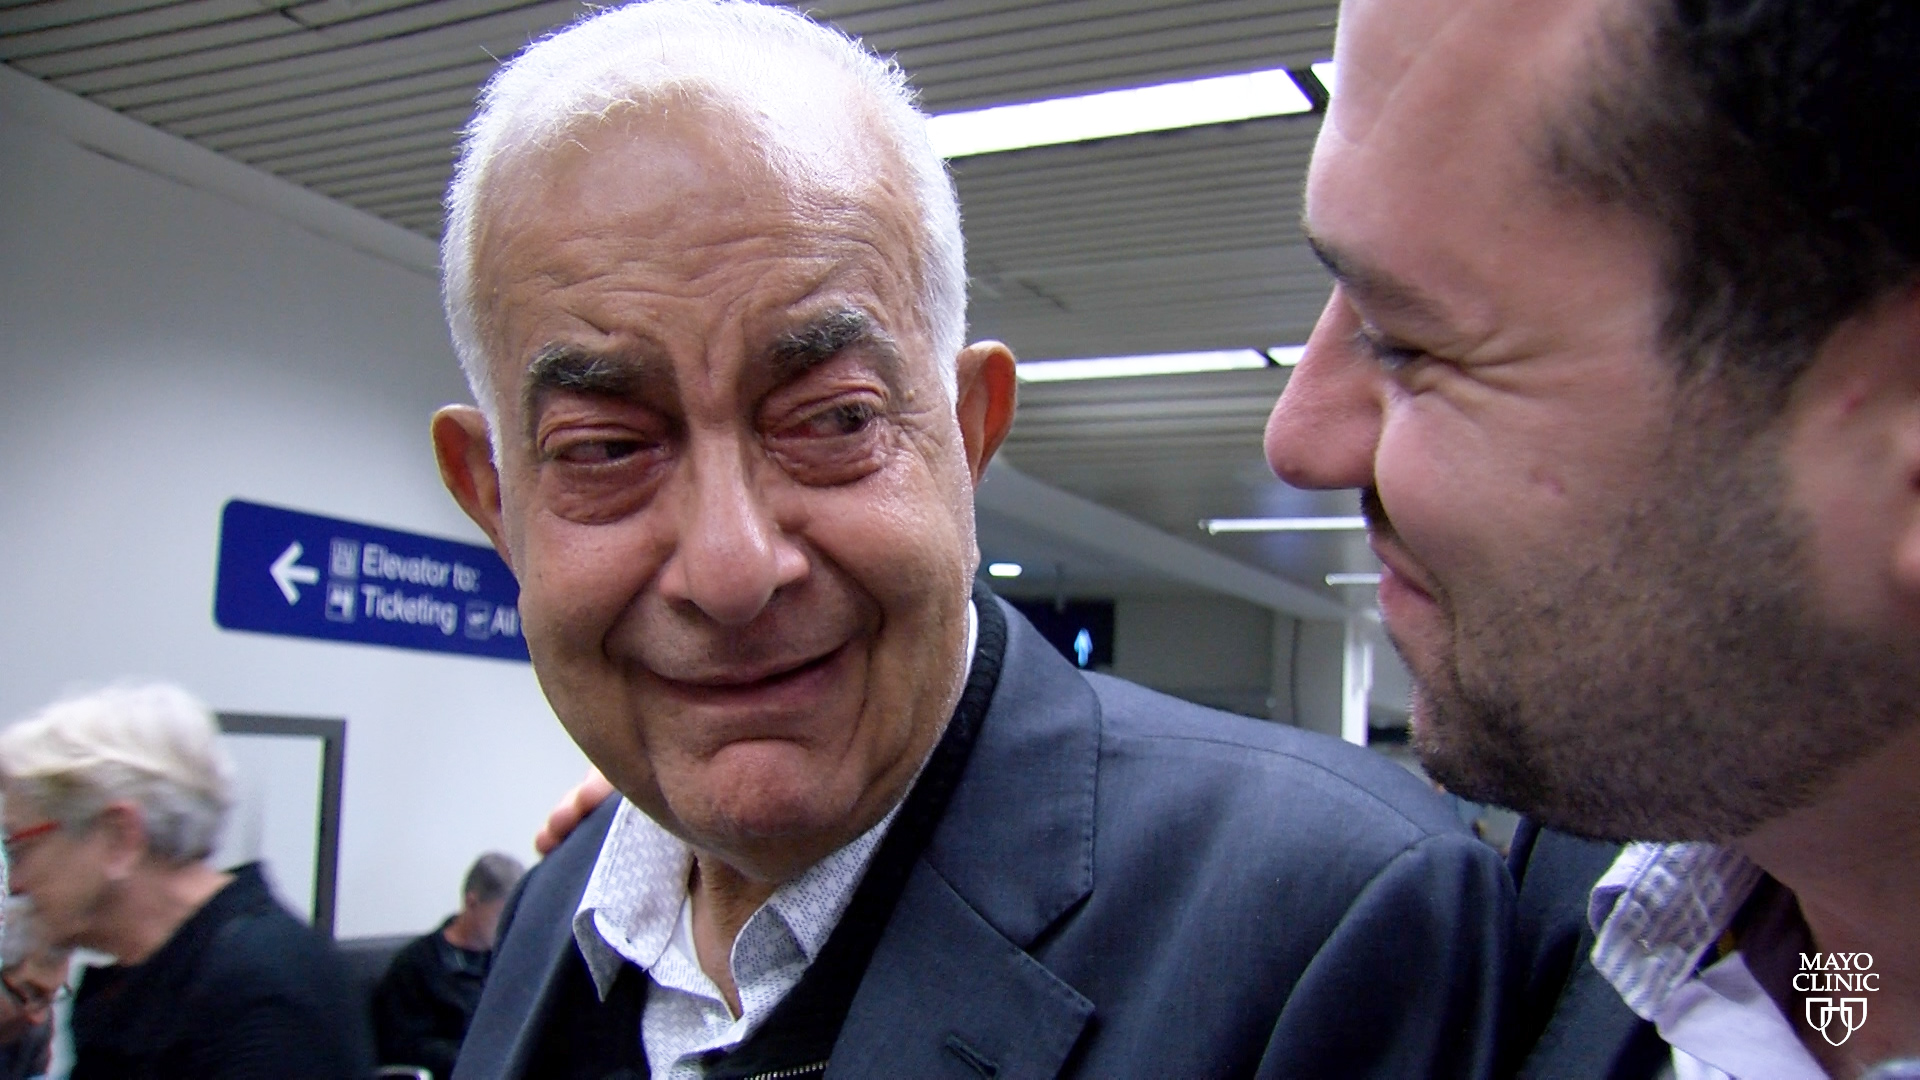 Dr. Fouad Chebib greeting his father at the airport